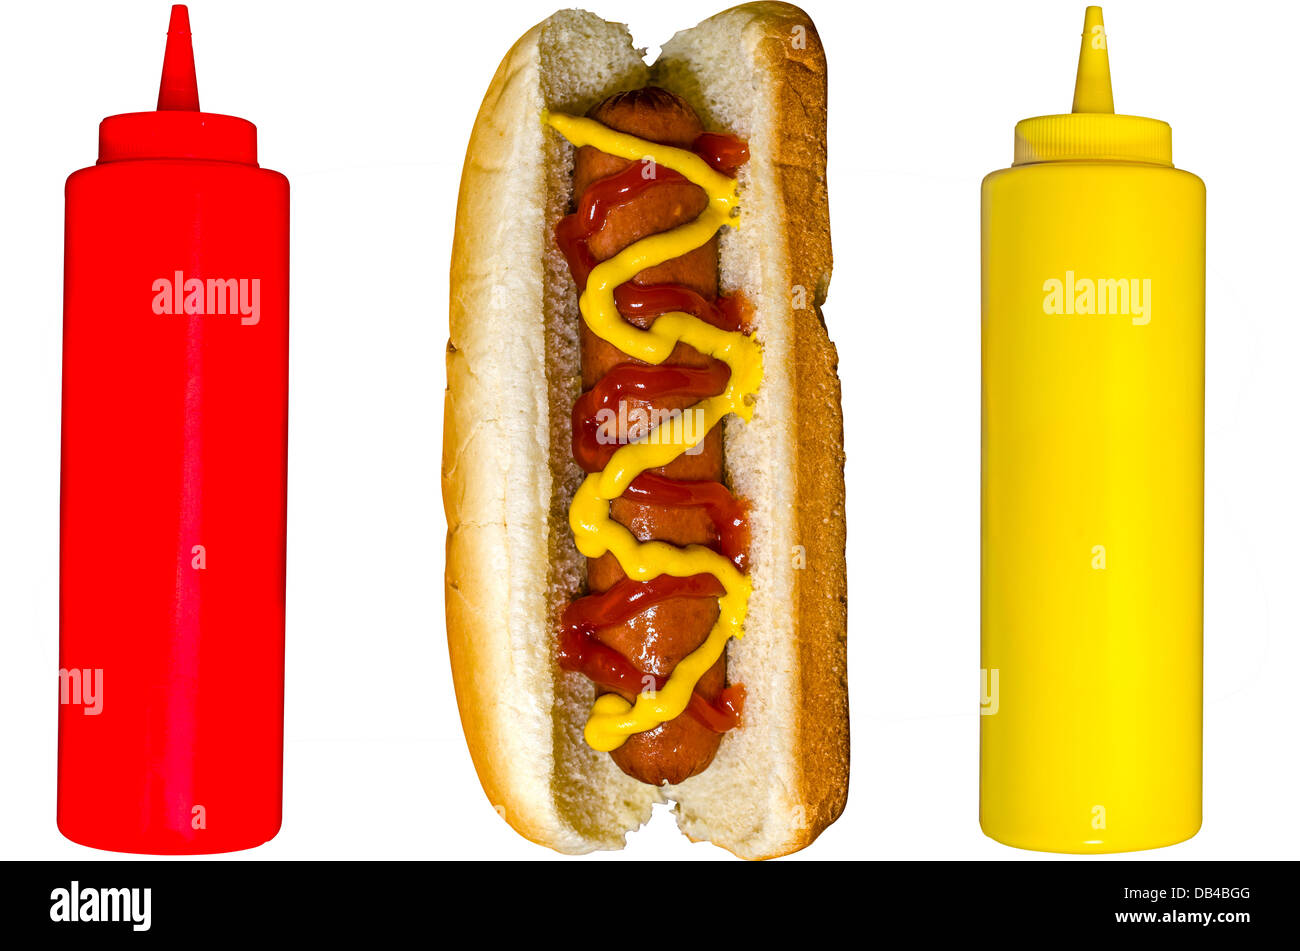 Hot dog with ketchup and mustard bottles isolated on white background. Stock Photo